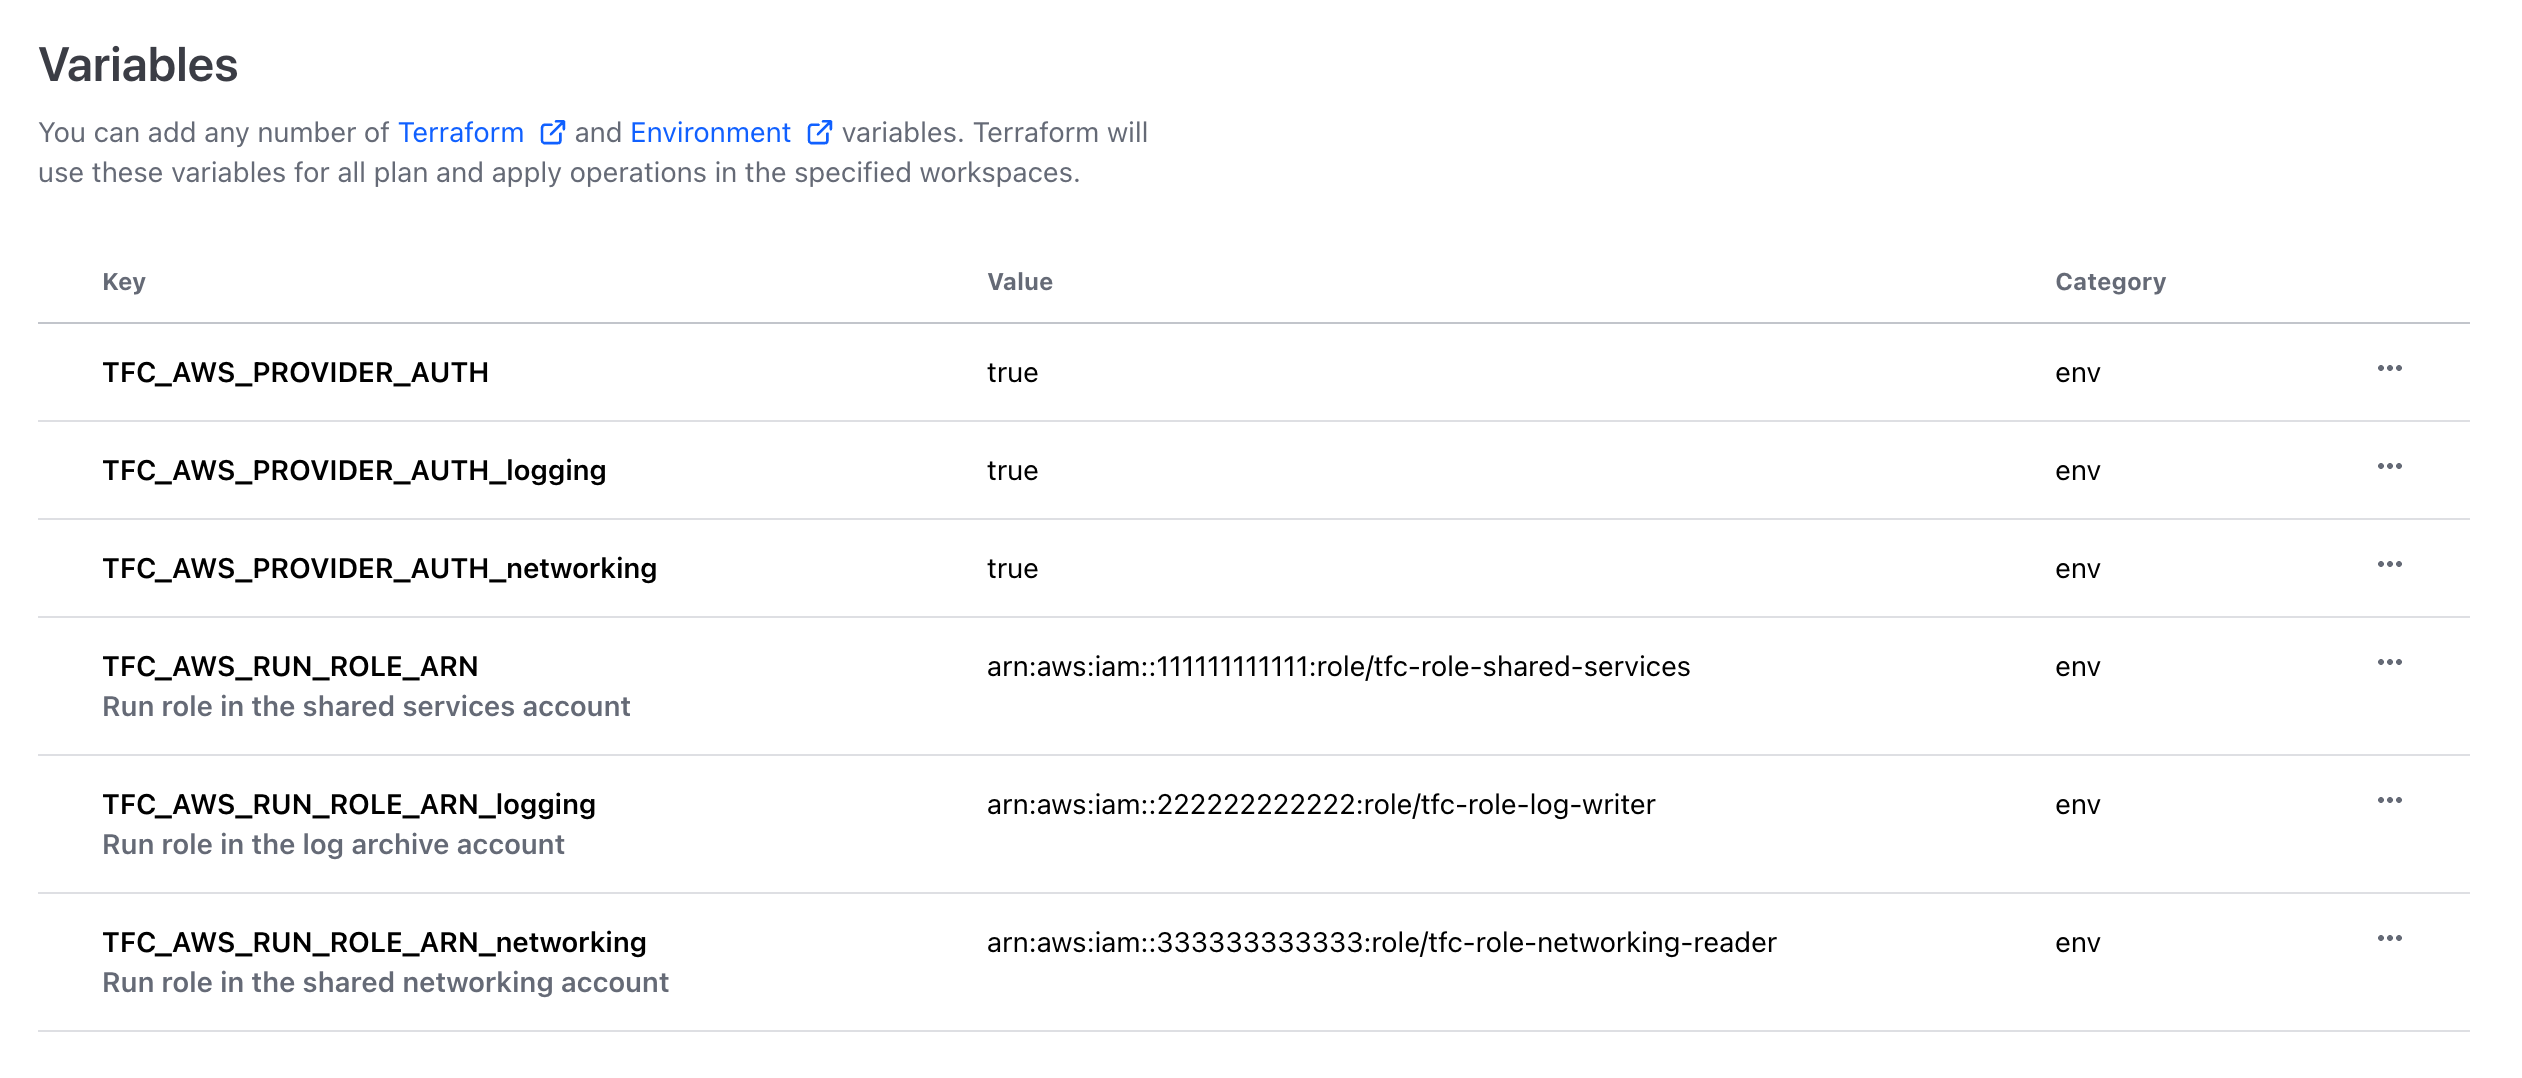 Environment variables assigned to a workspace enable dynamic provider credentials for multiple instances of the AWS provider with unique roles.